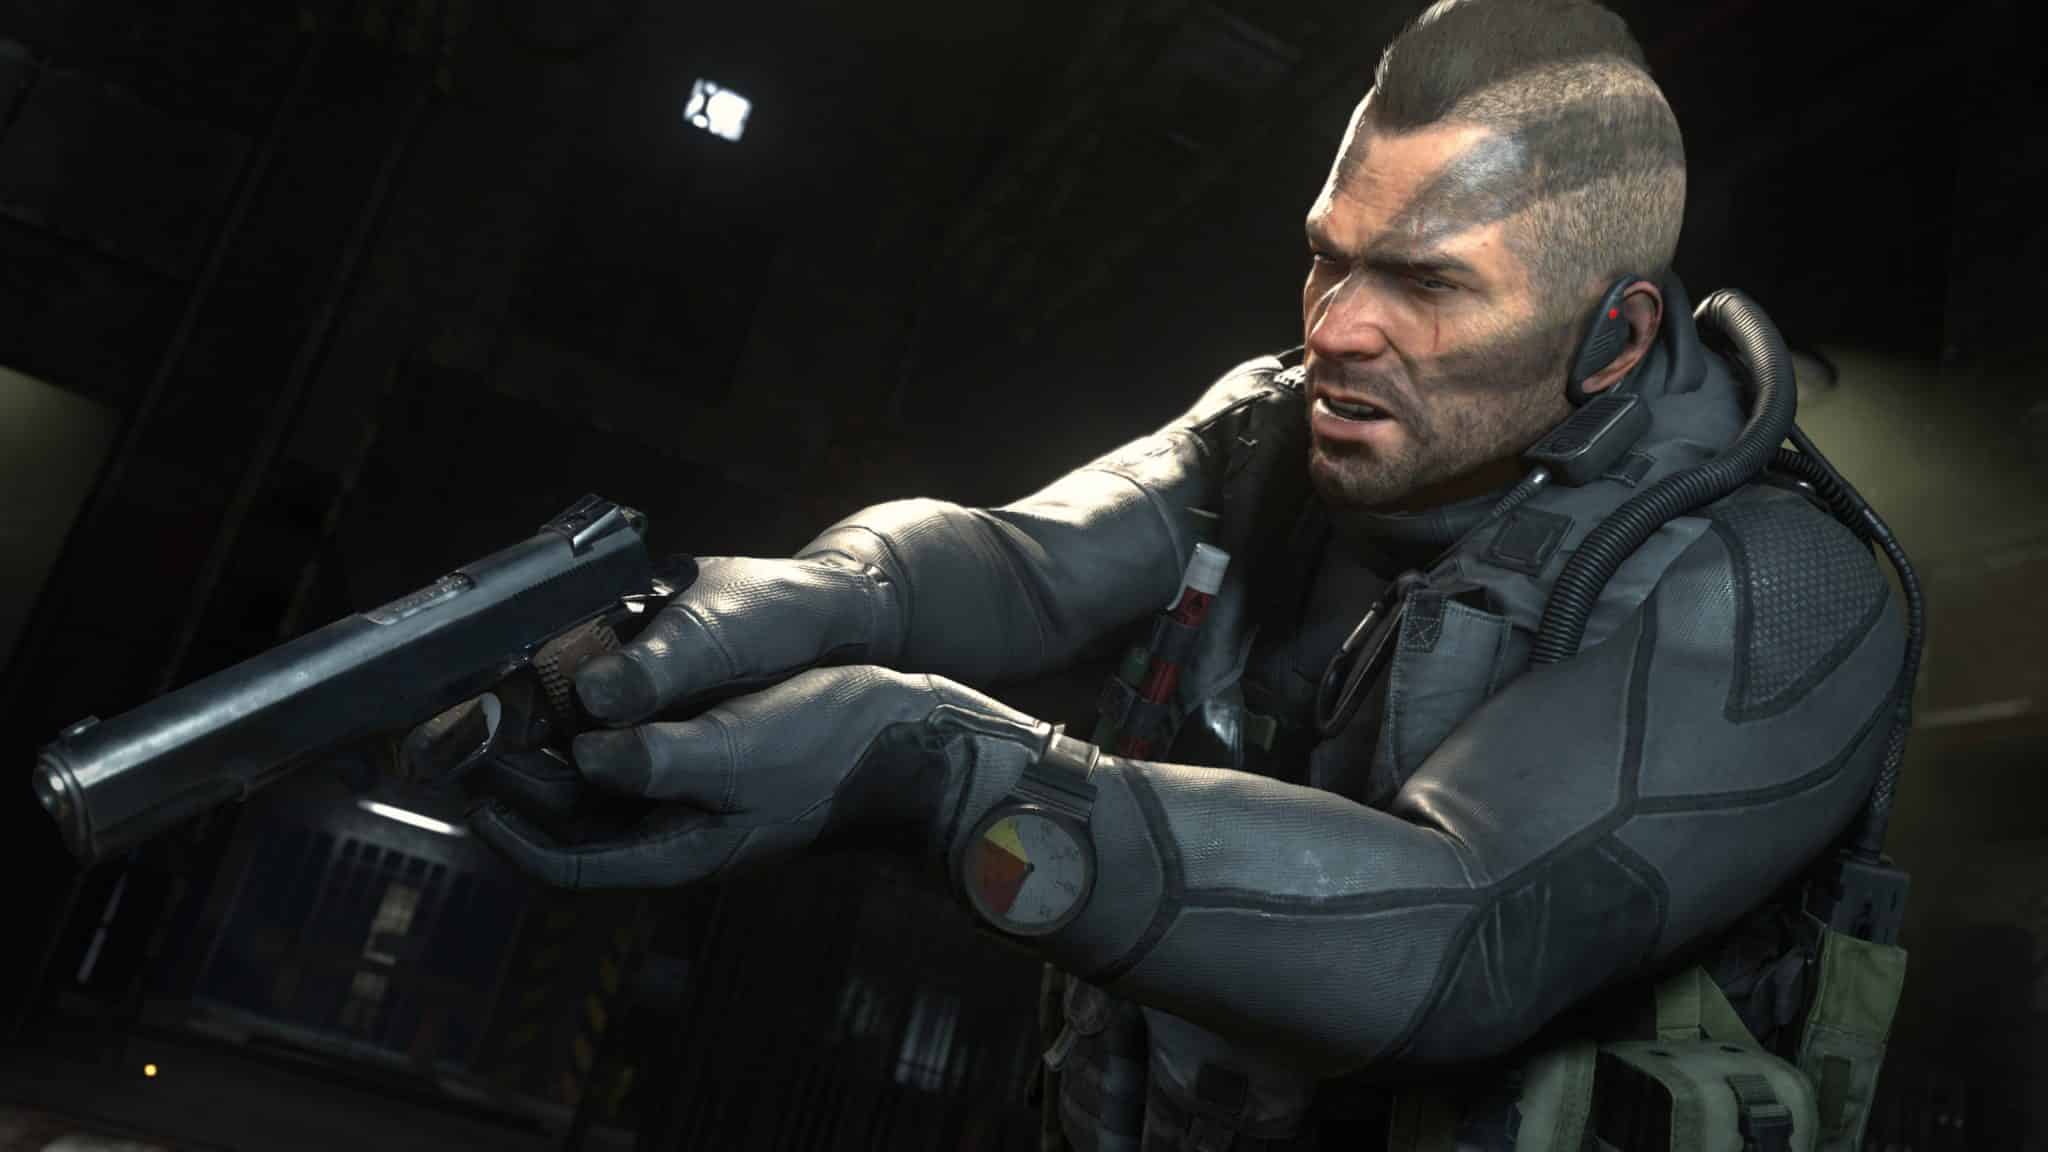 Who is Soap MacTavish in Call of Duty? Background & more